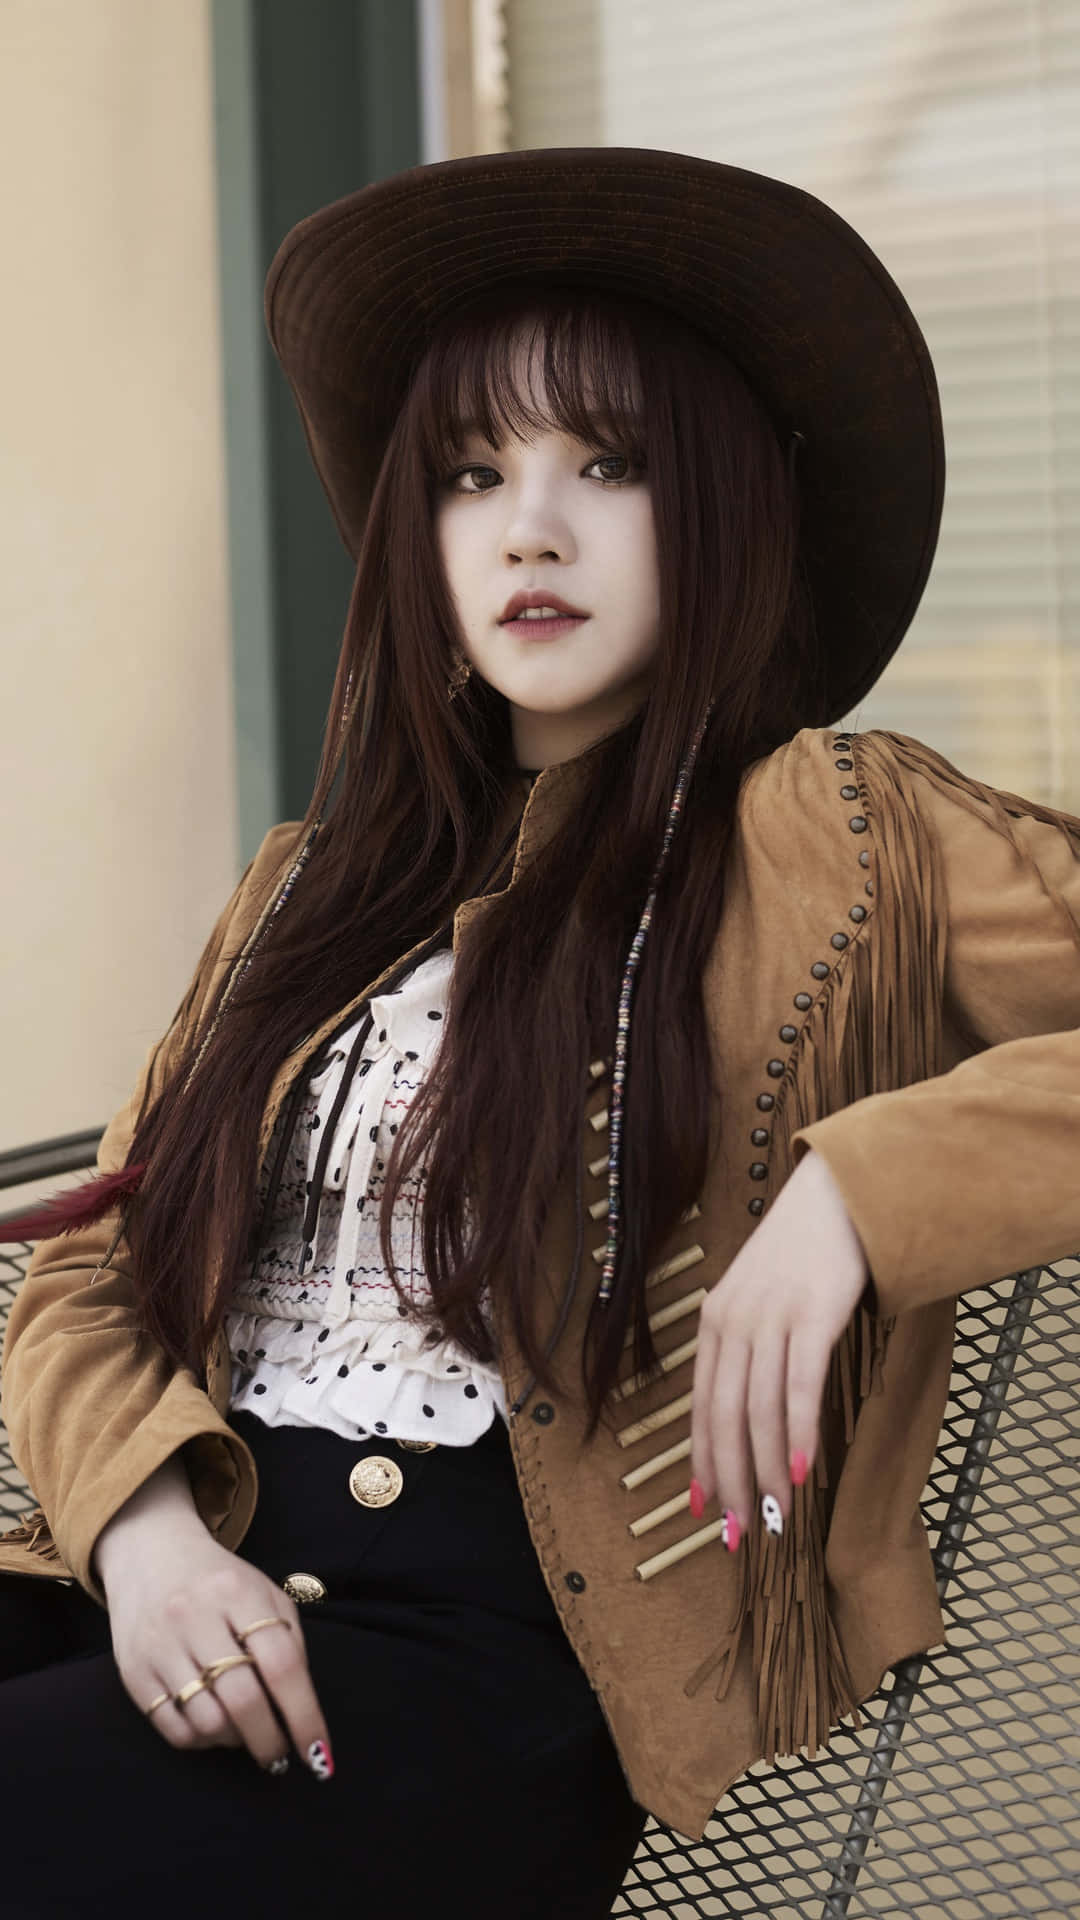 Stylish Cowgirl Outfit Portrait Wallpaper